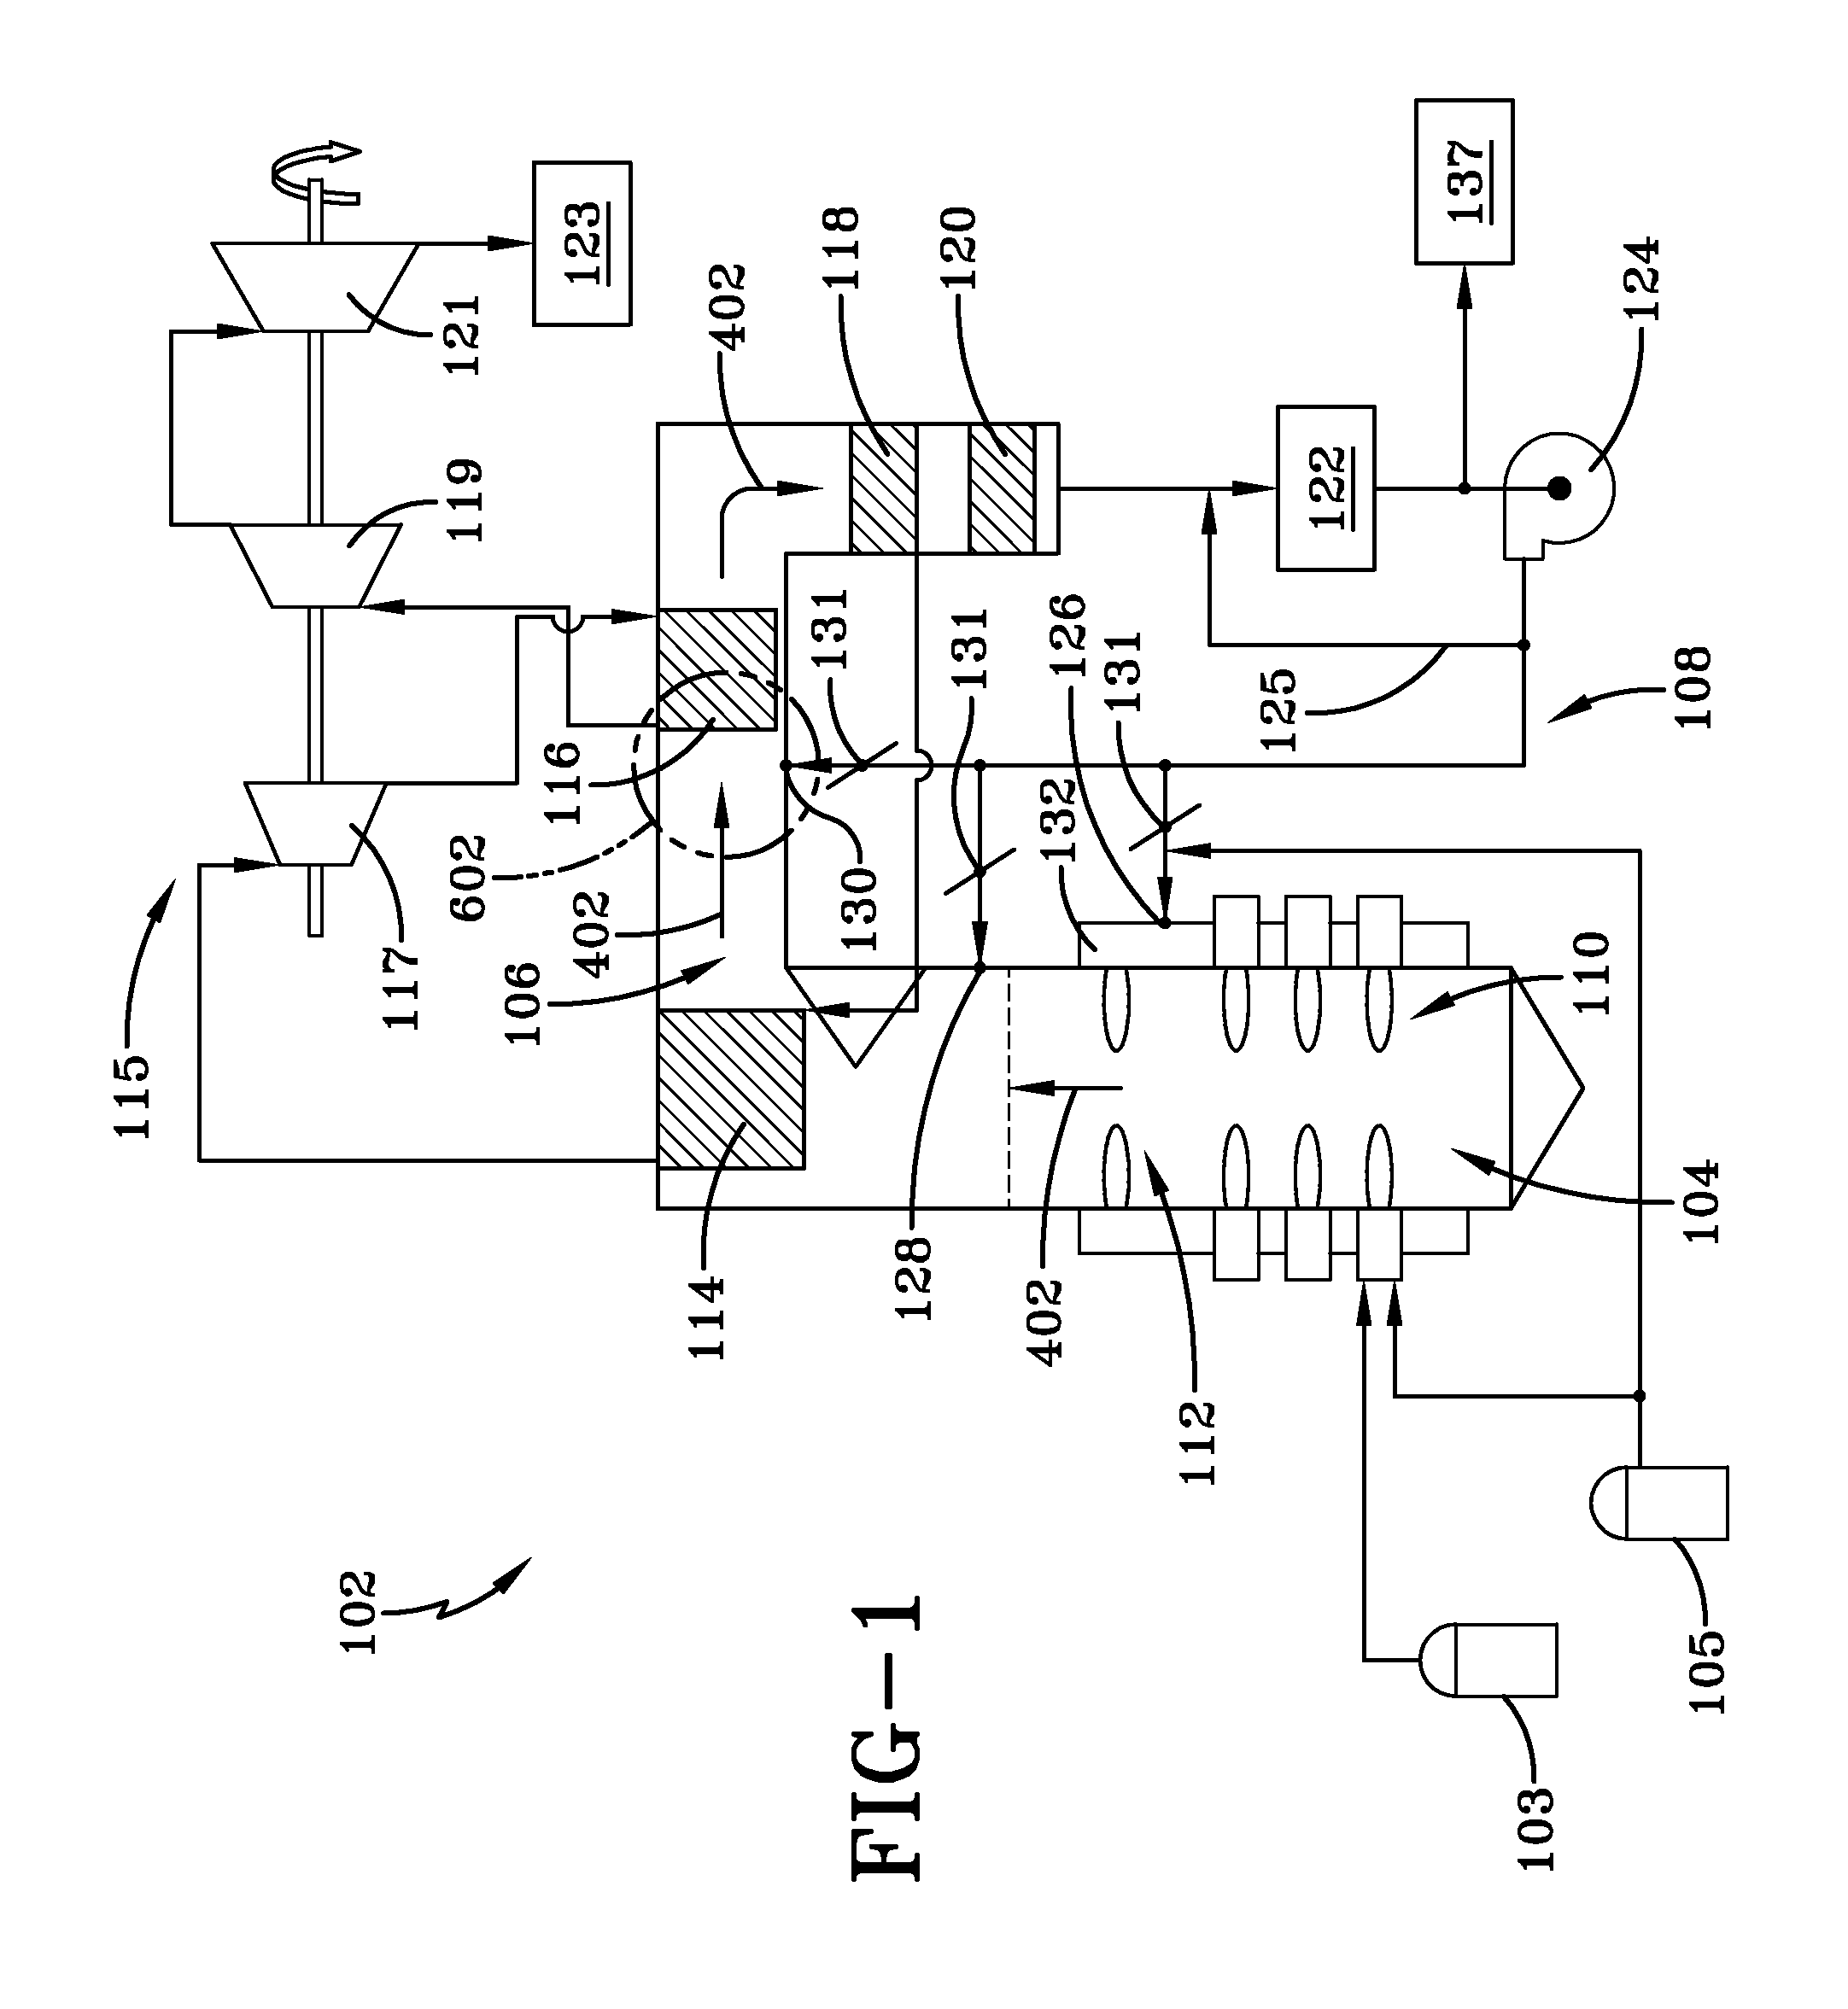 Process temperature control in oxy/fuel combustion system